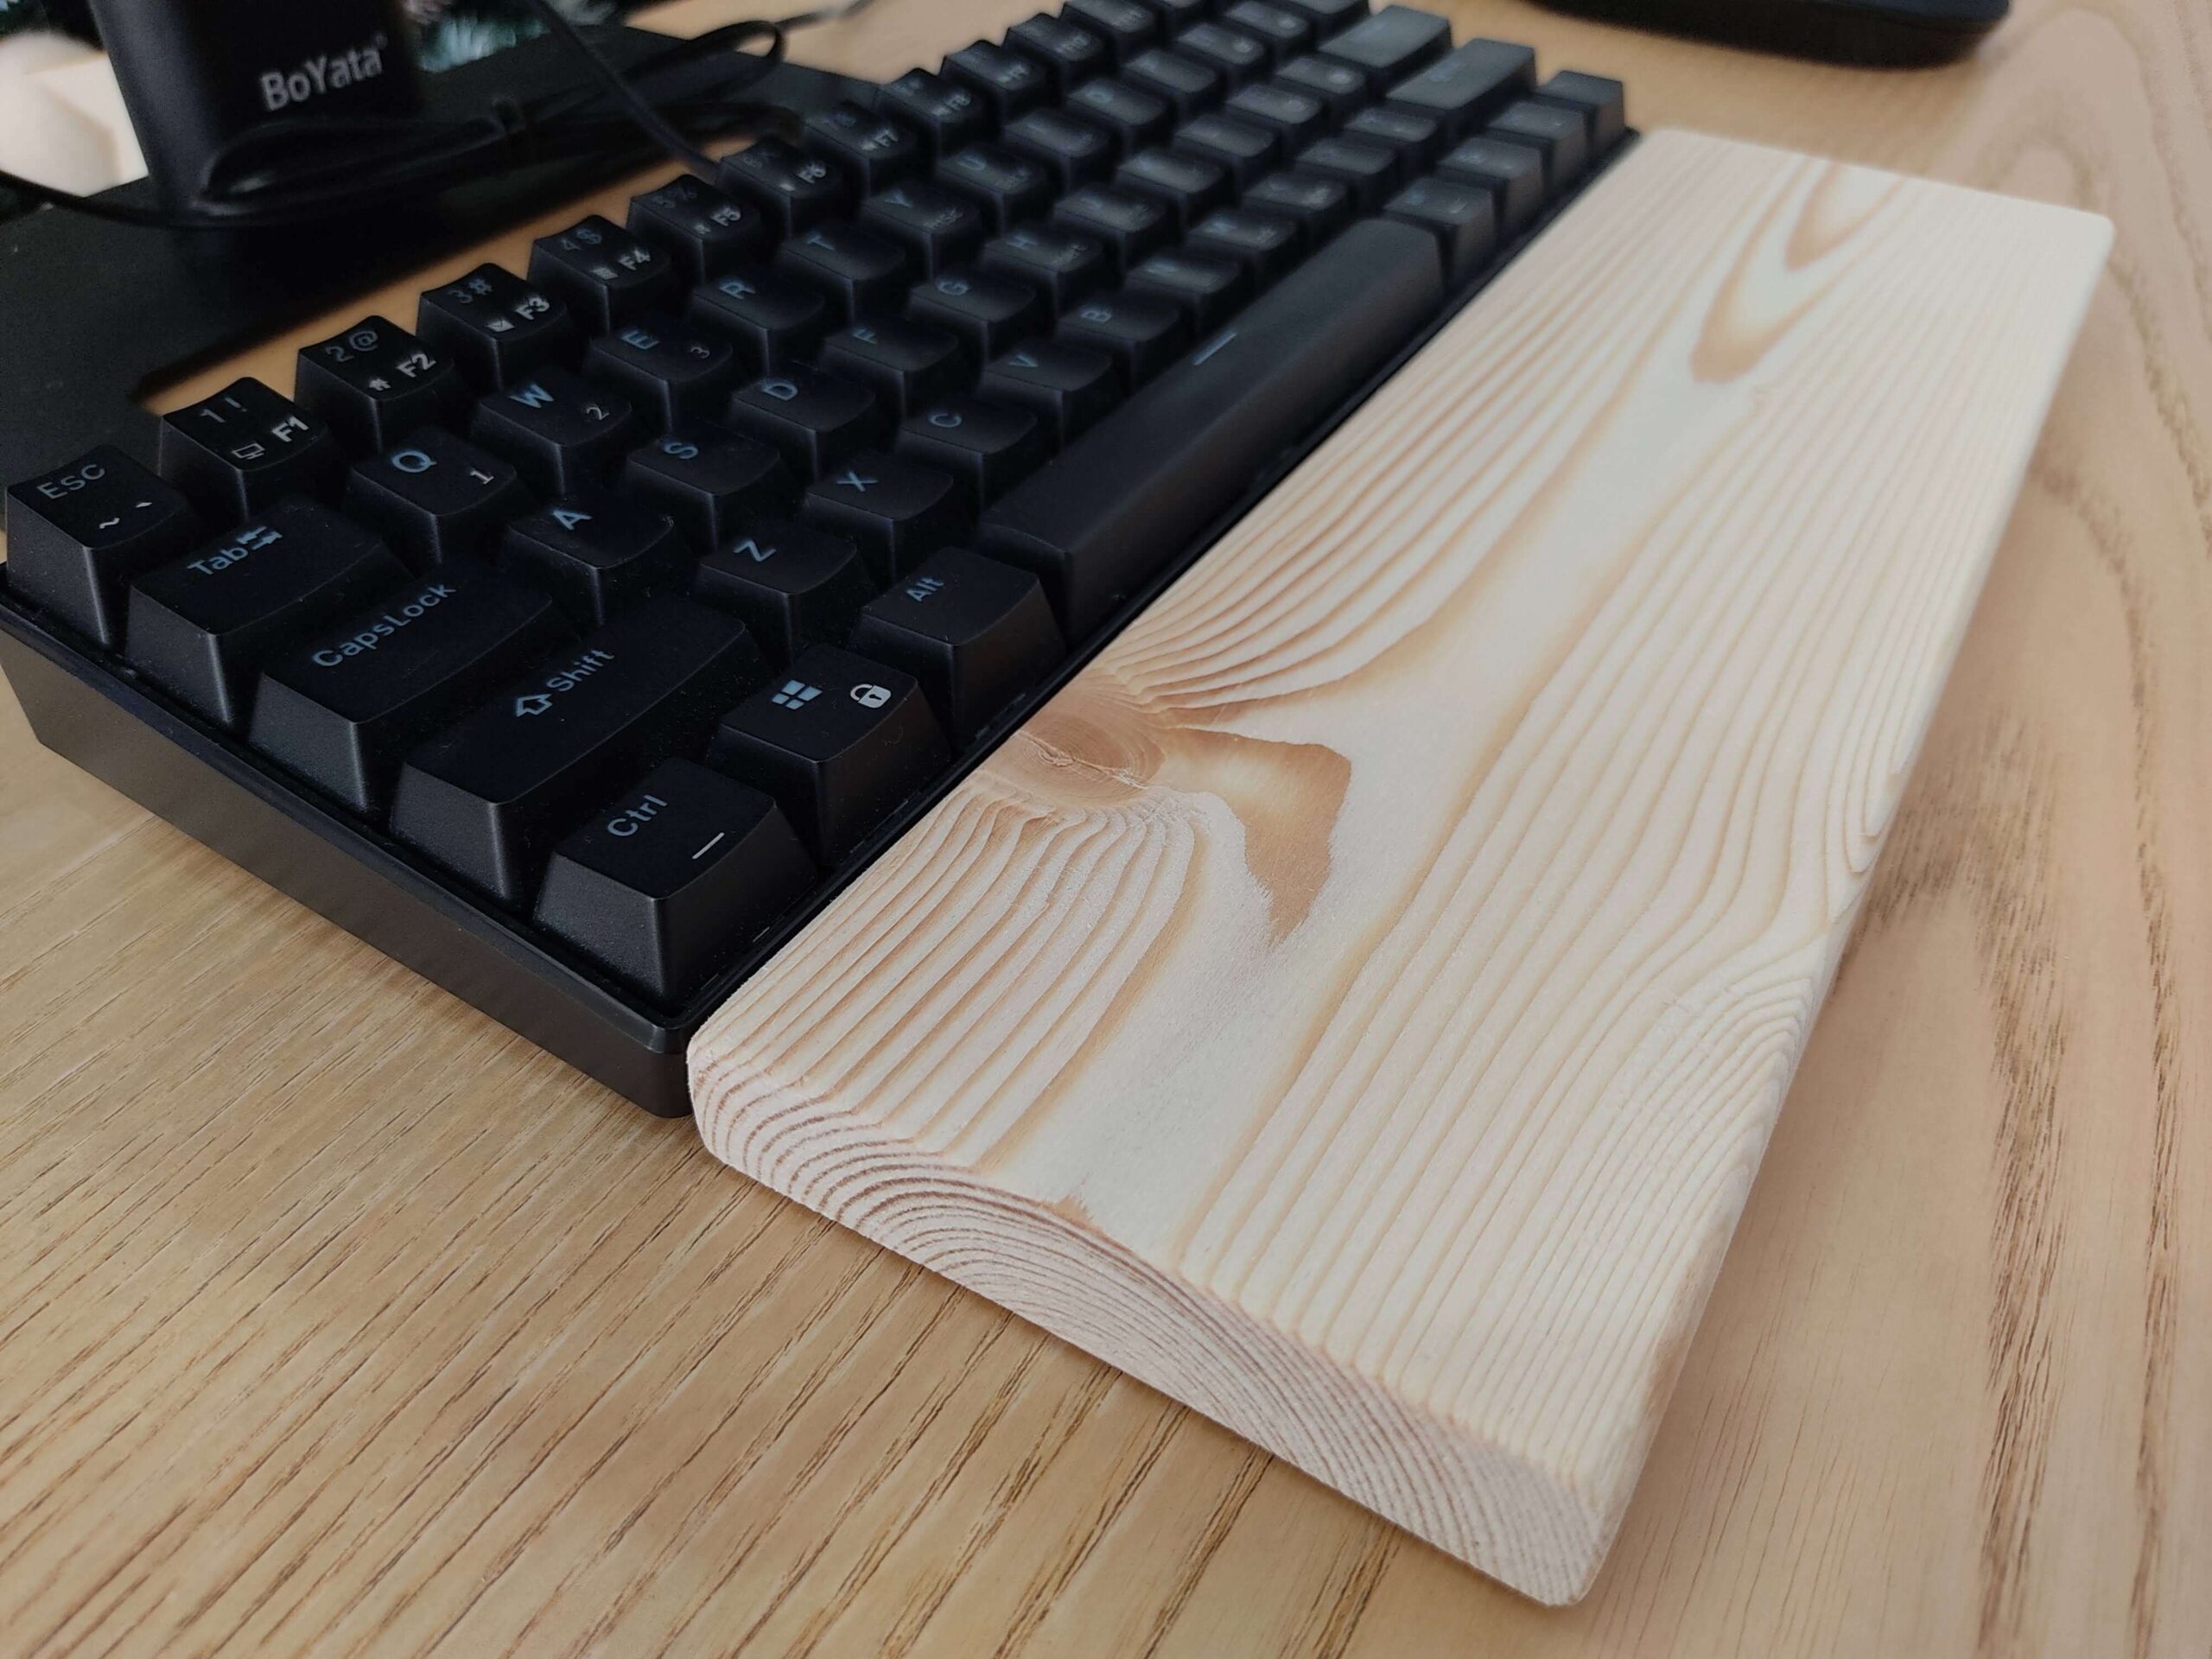 wrist-rest-and-keyboard